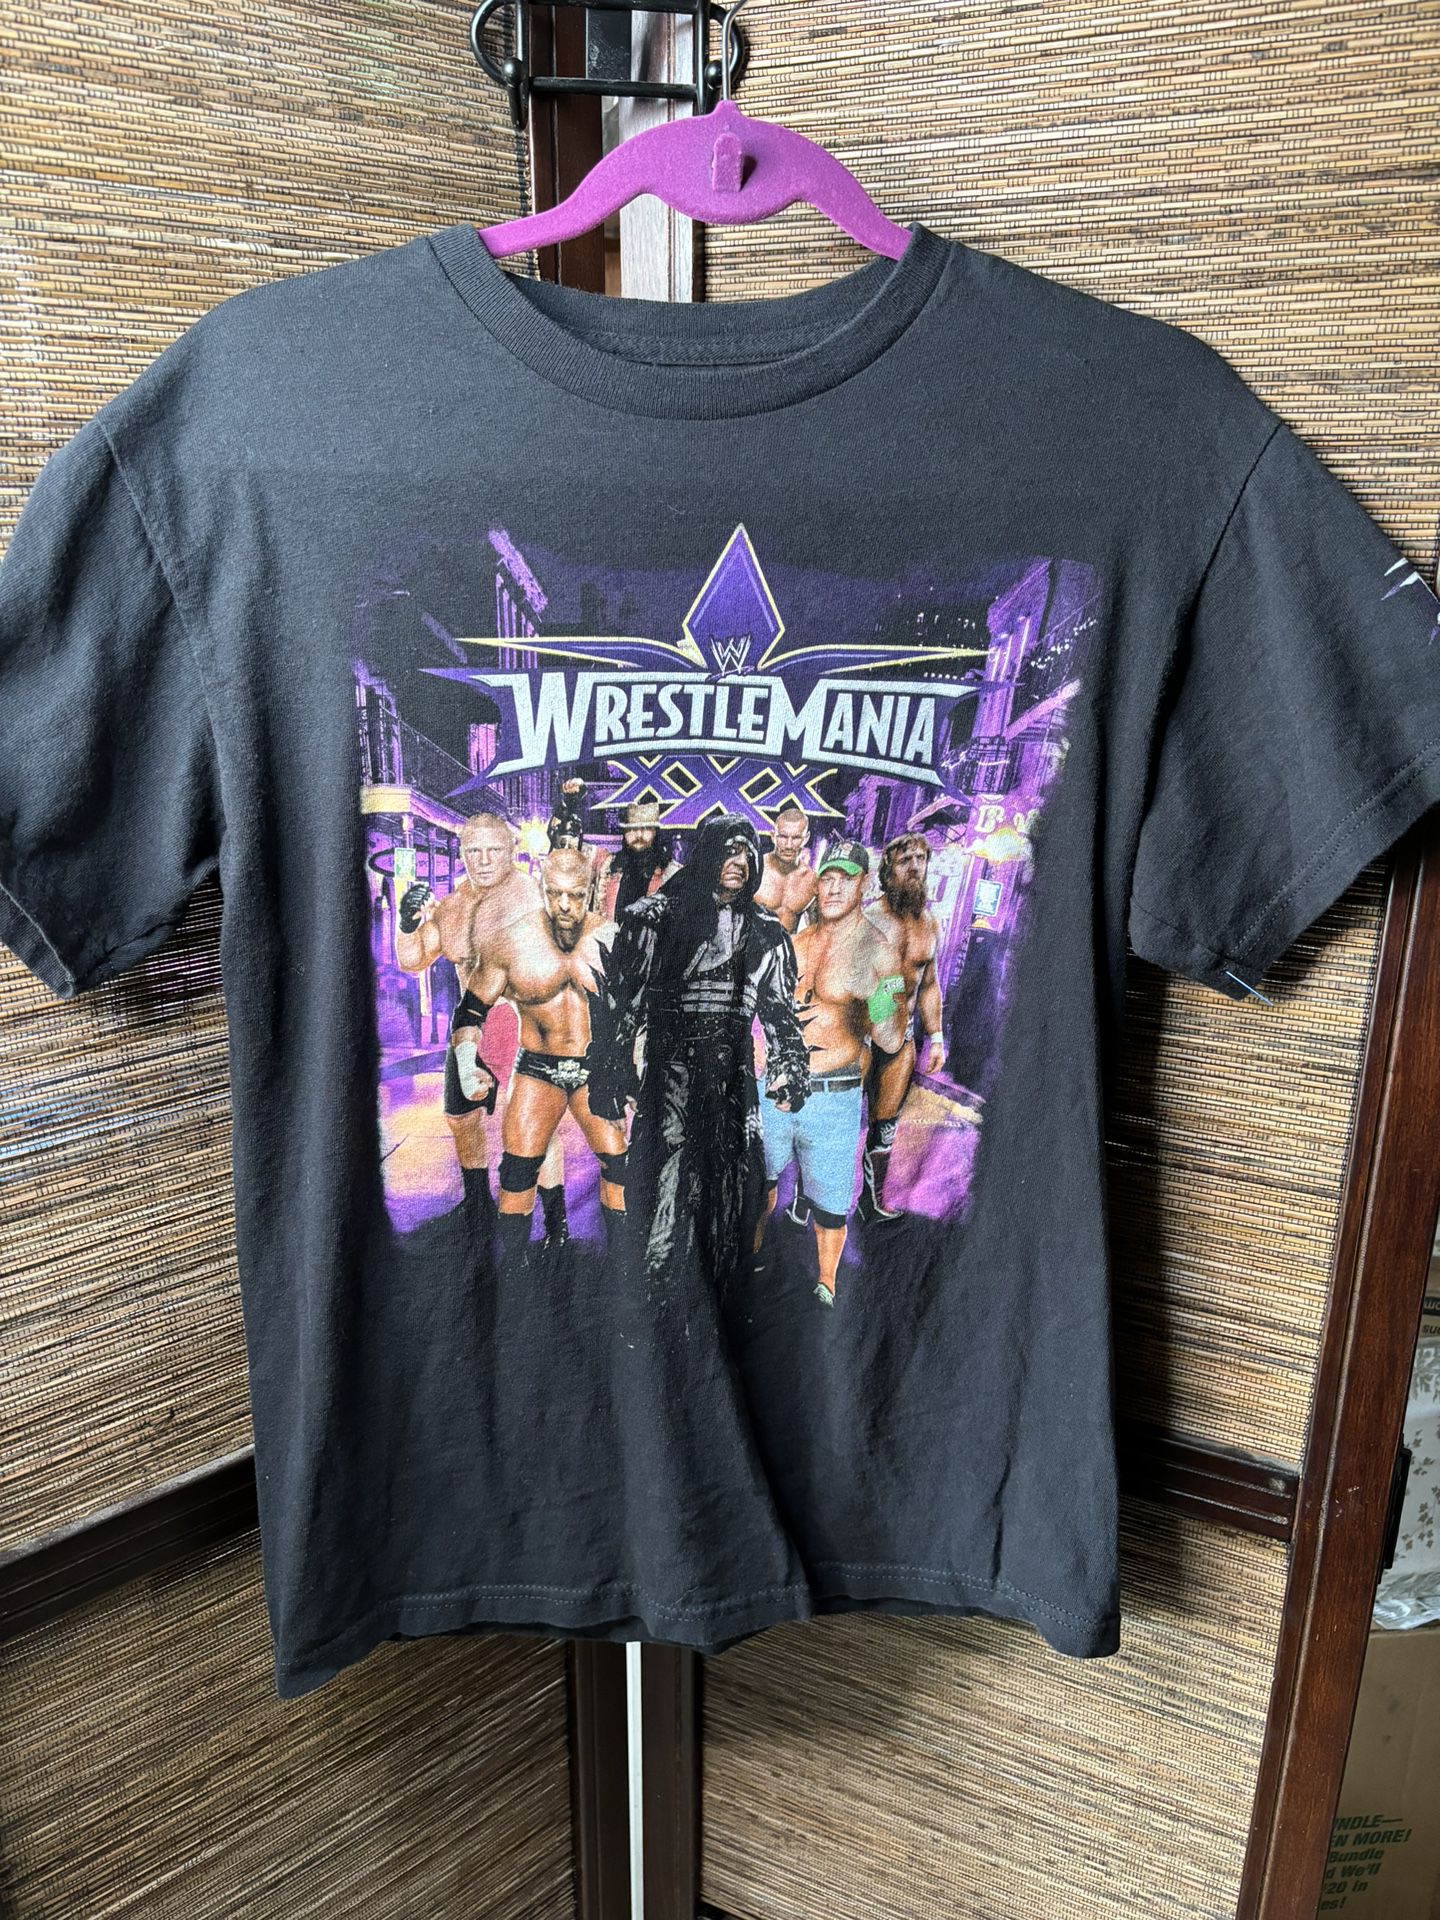 WWE HD Crew Wrestlemania 30 XXX Extreme Rules Shirt 2014 Wrestling Size Med